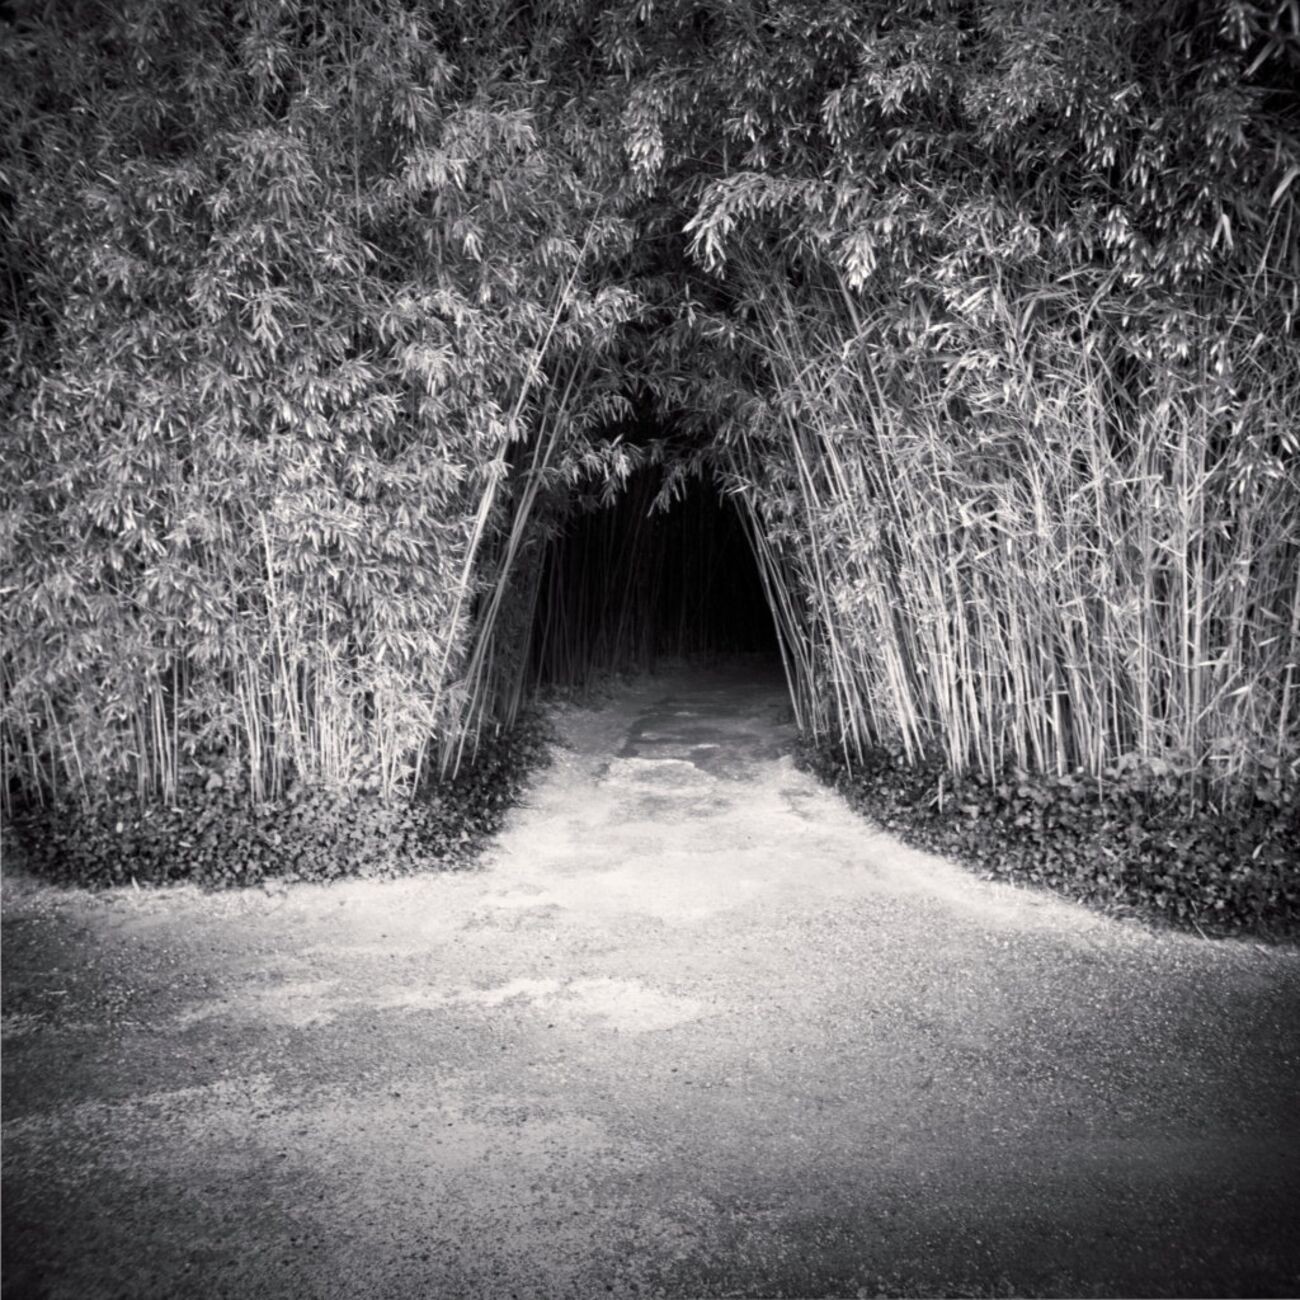 Get a 9.1 x 9.1 in, Bamboo Tunnel. Ref-11519-3 - Denis Olivier Art Photography